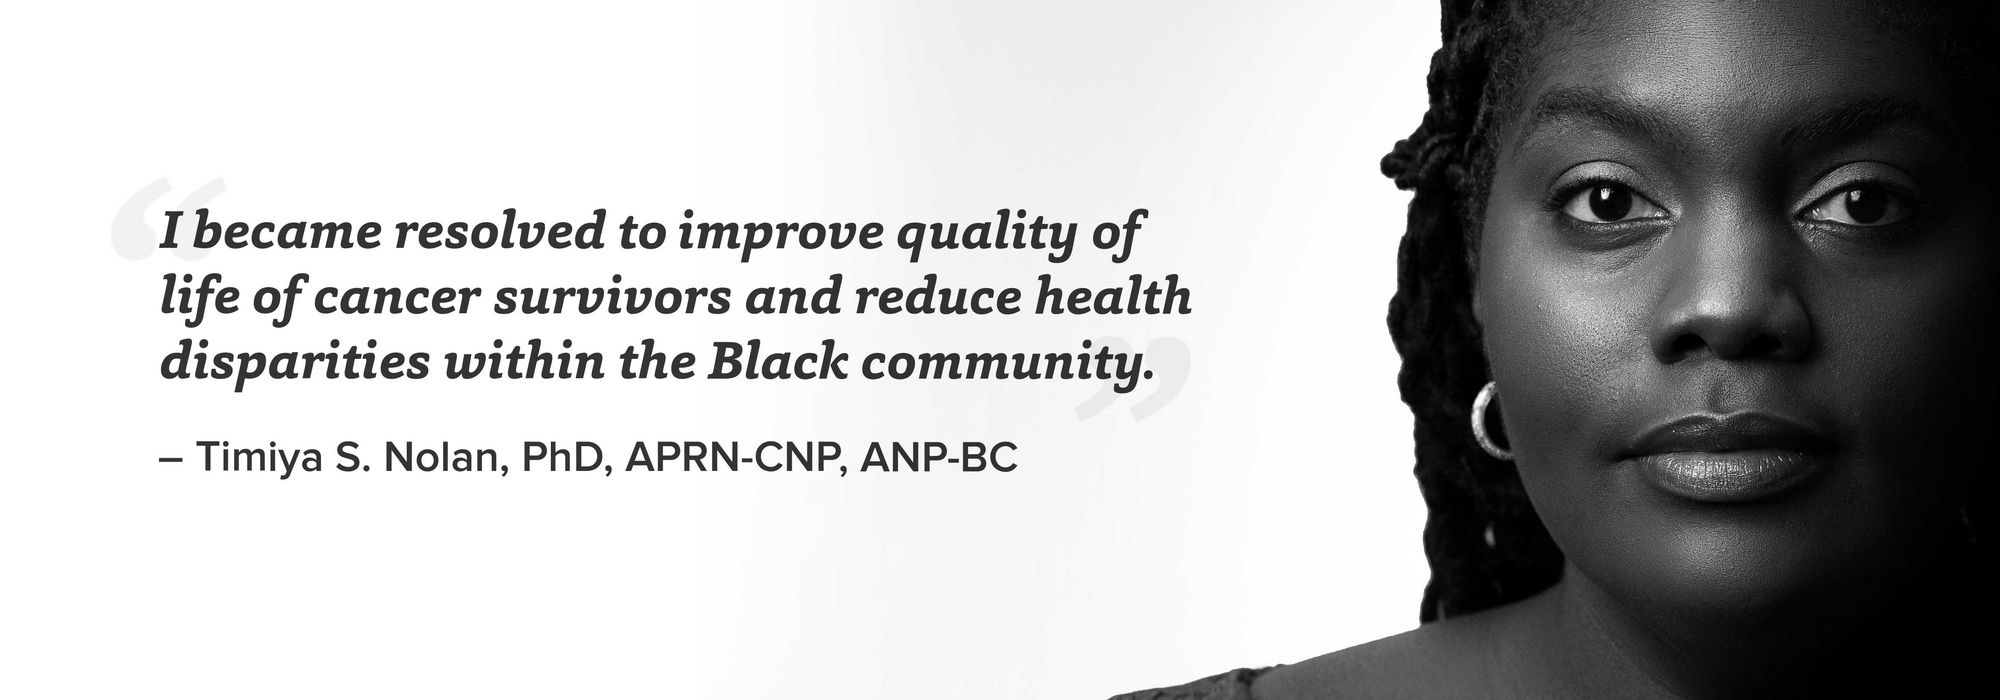 black and white portrait of Timiya Nolan with quote "I became resolved to improve quality of life of cancer survivors and reduce health disparities within the Black community. – Timiya S. Nolan, PhD, APRN-CNP, ANP-BC"